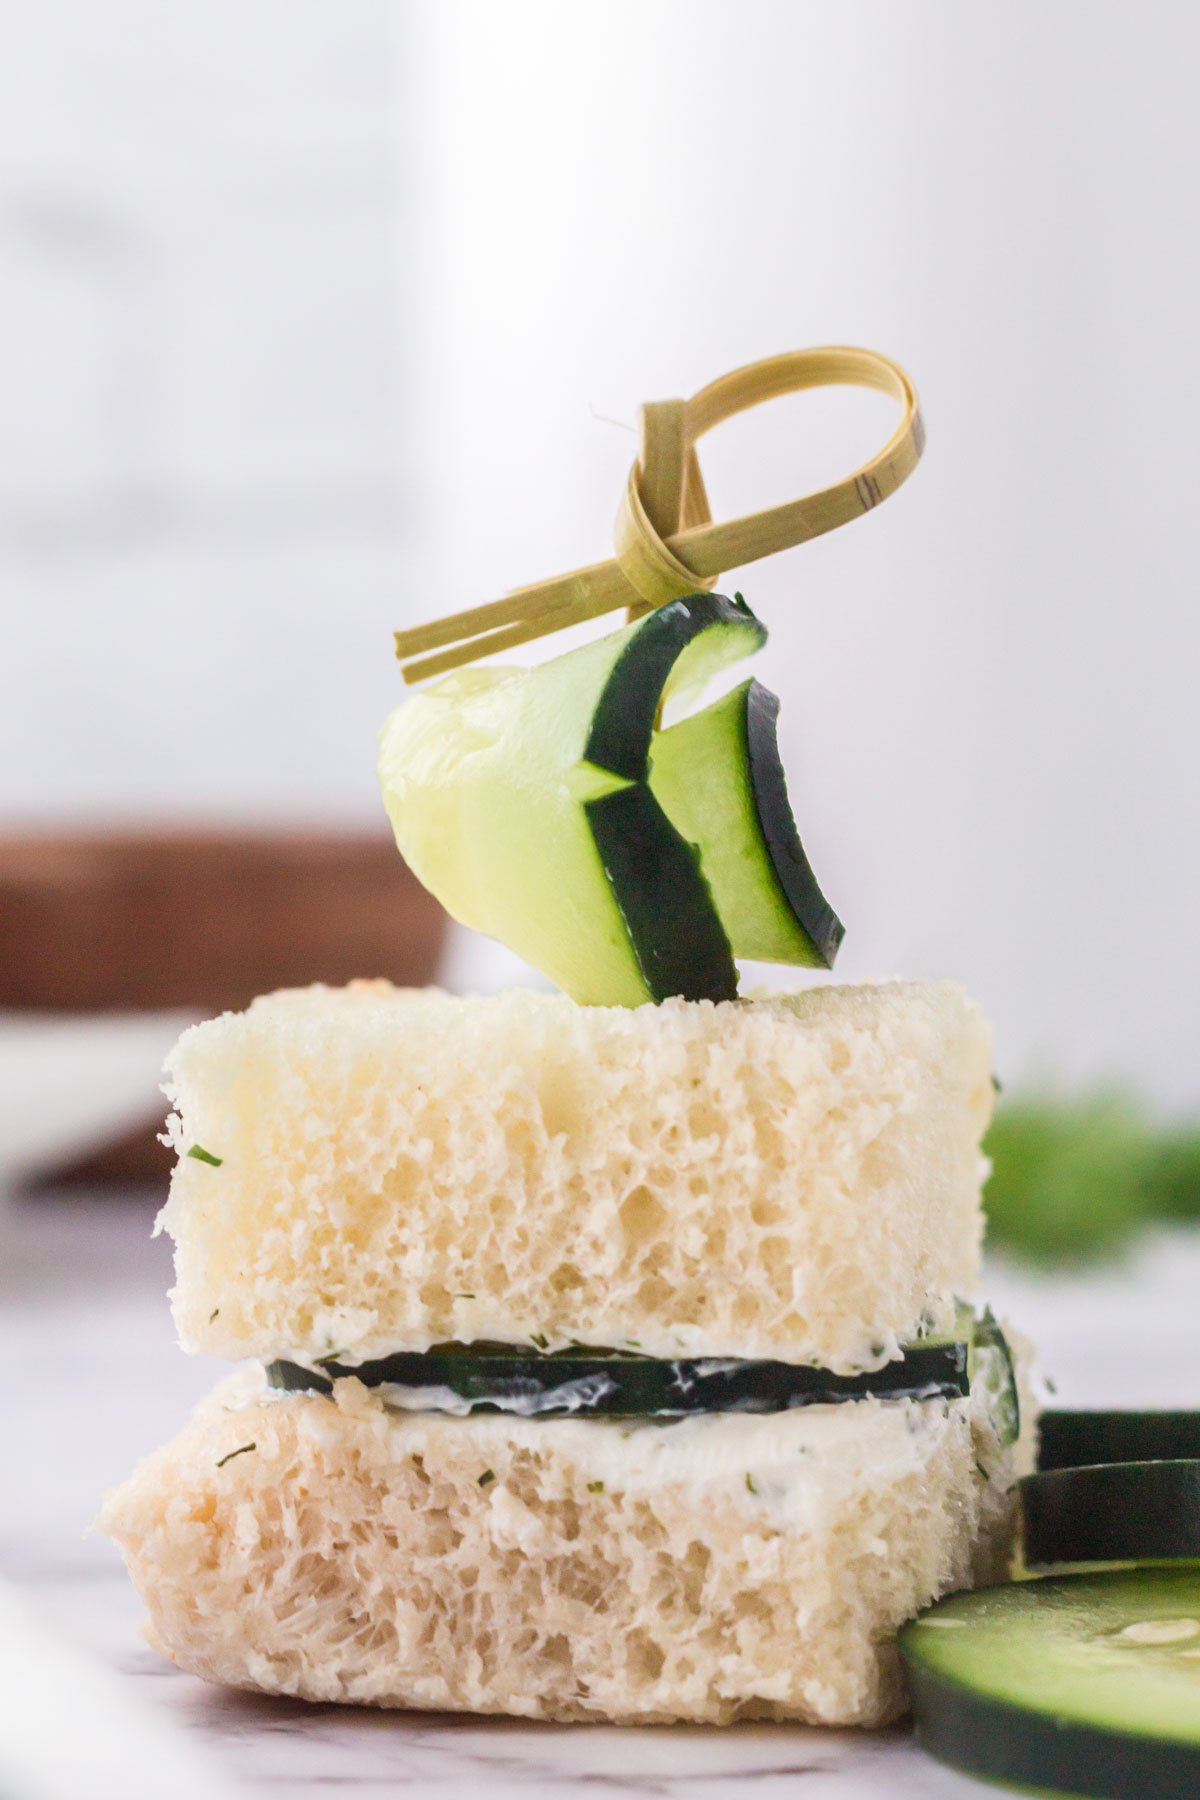 cucumber sandwich with a fancy toothpick